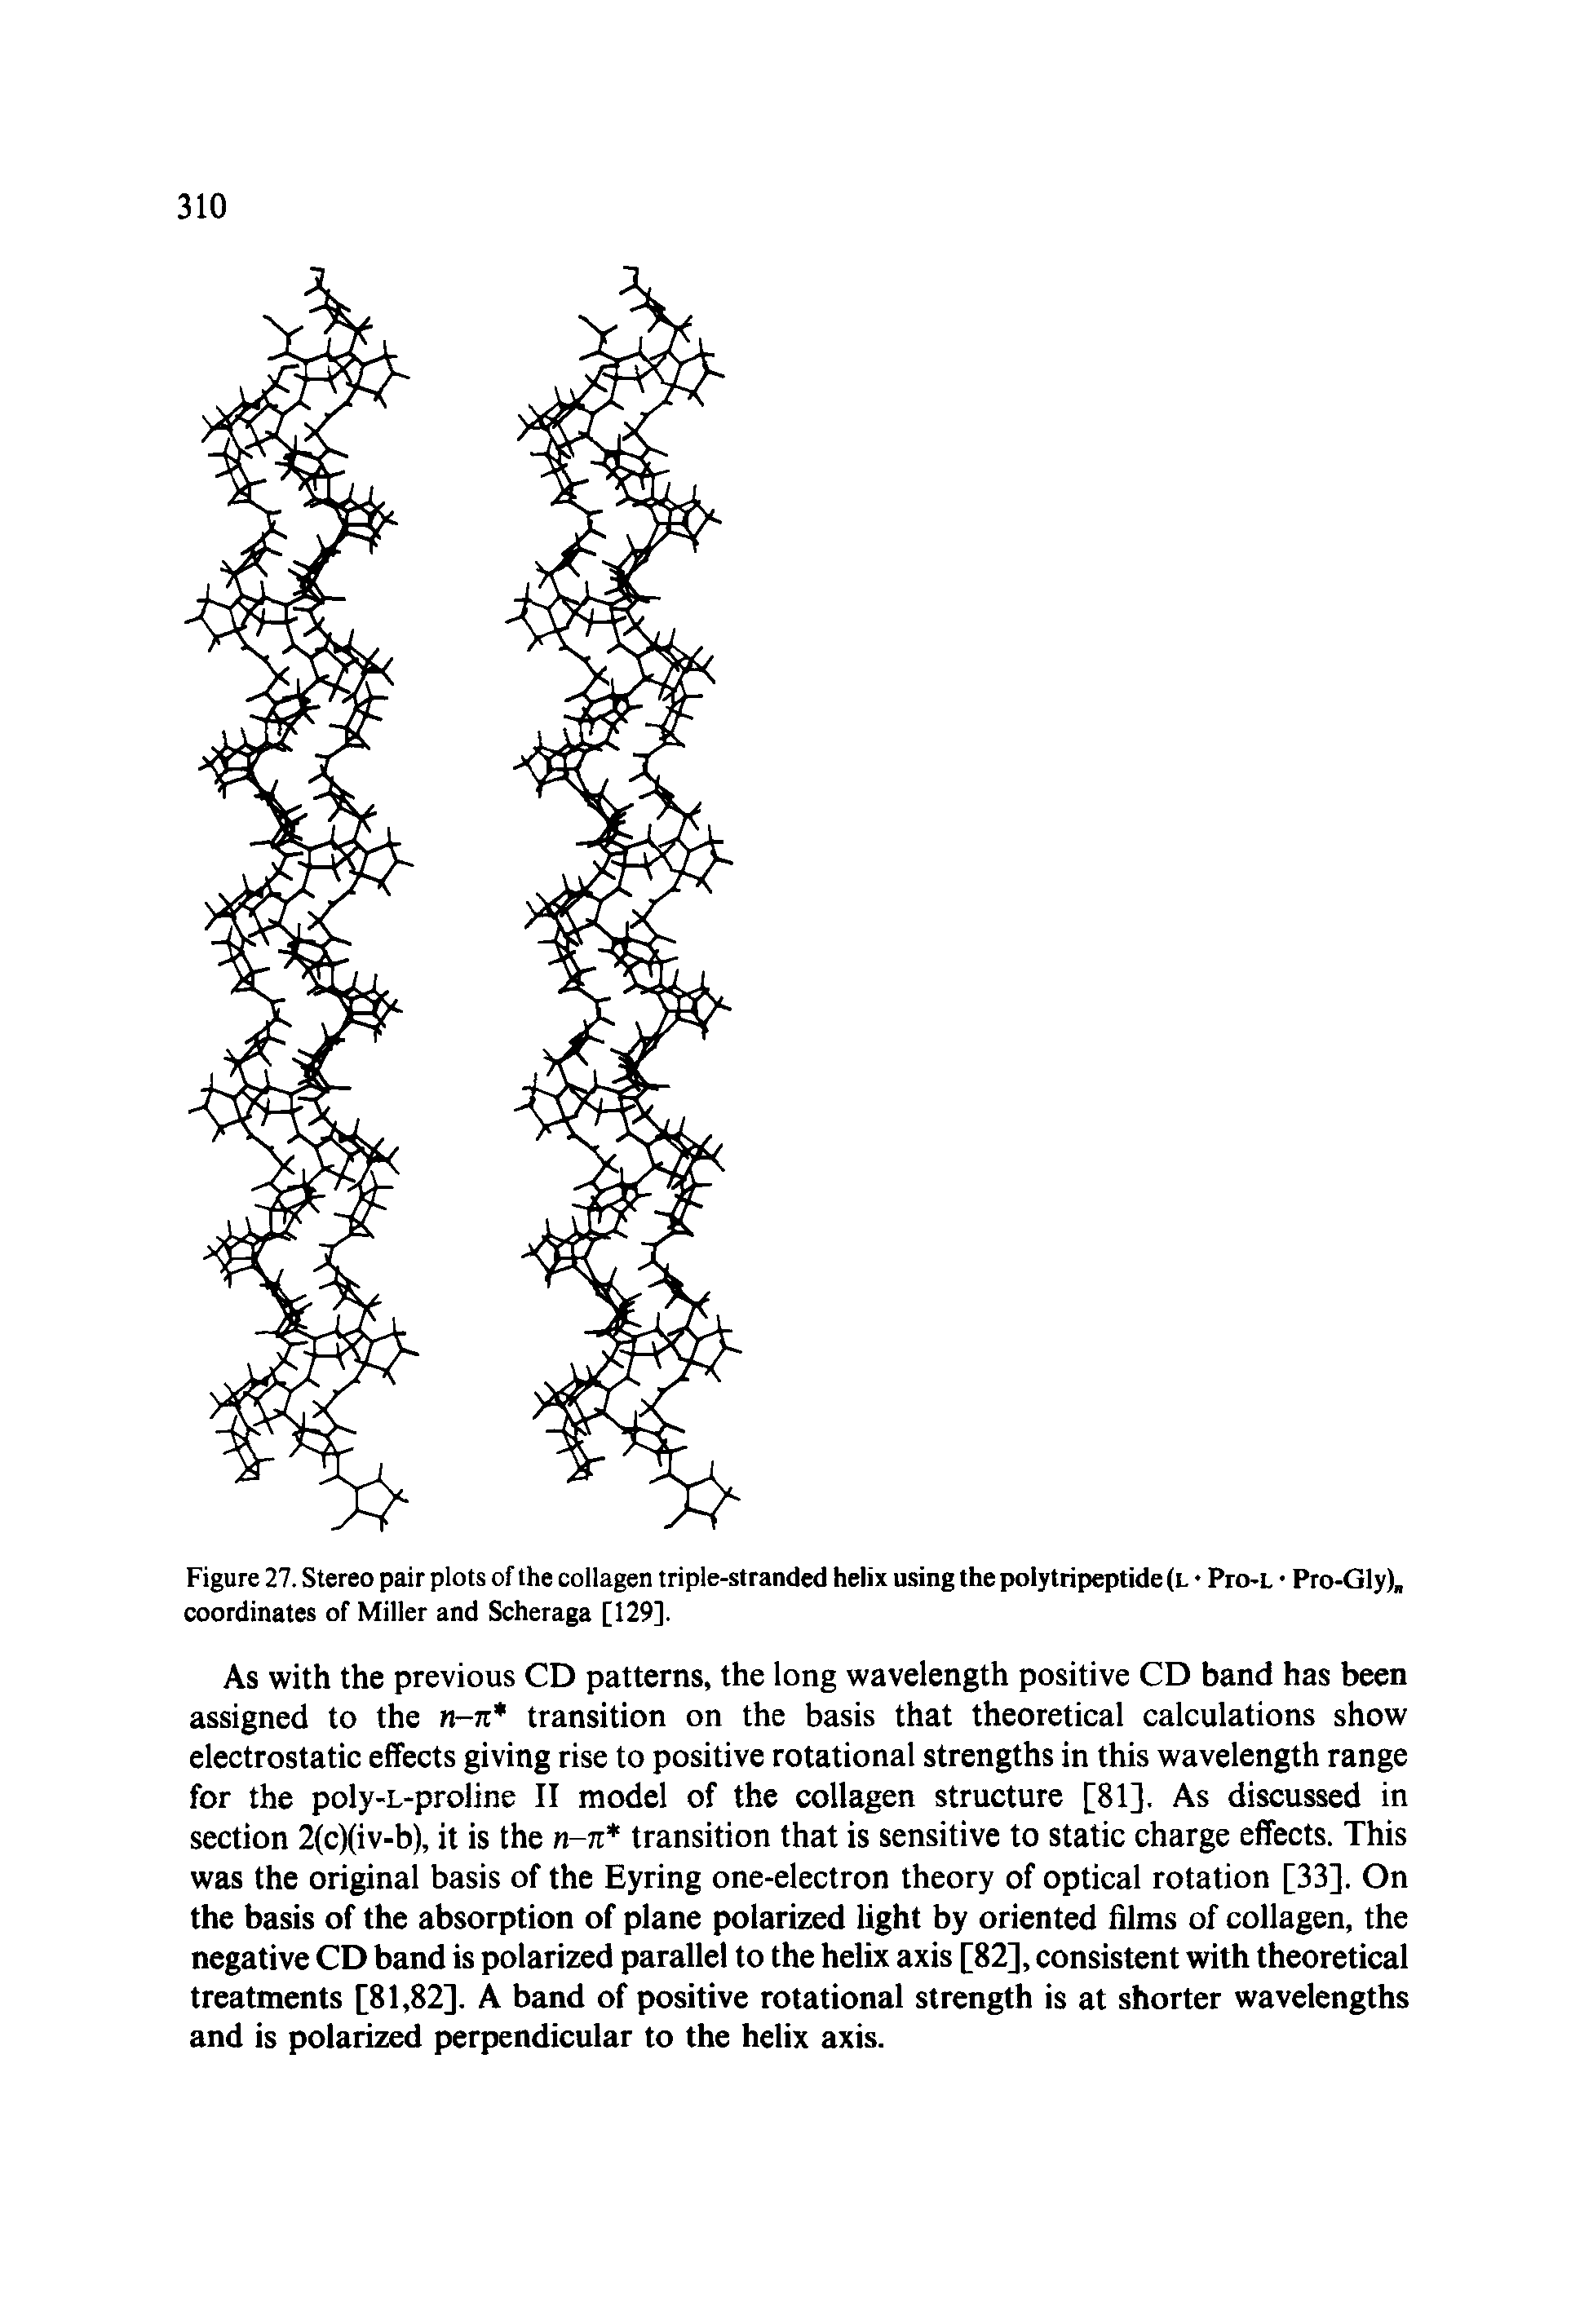 Figure 27. Stereo pair plots of the collagen triple-stranded helix using the polytripeptide (l Pro-L Pro-Gly), coordinates of Miller and Scheraga [129].